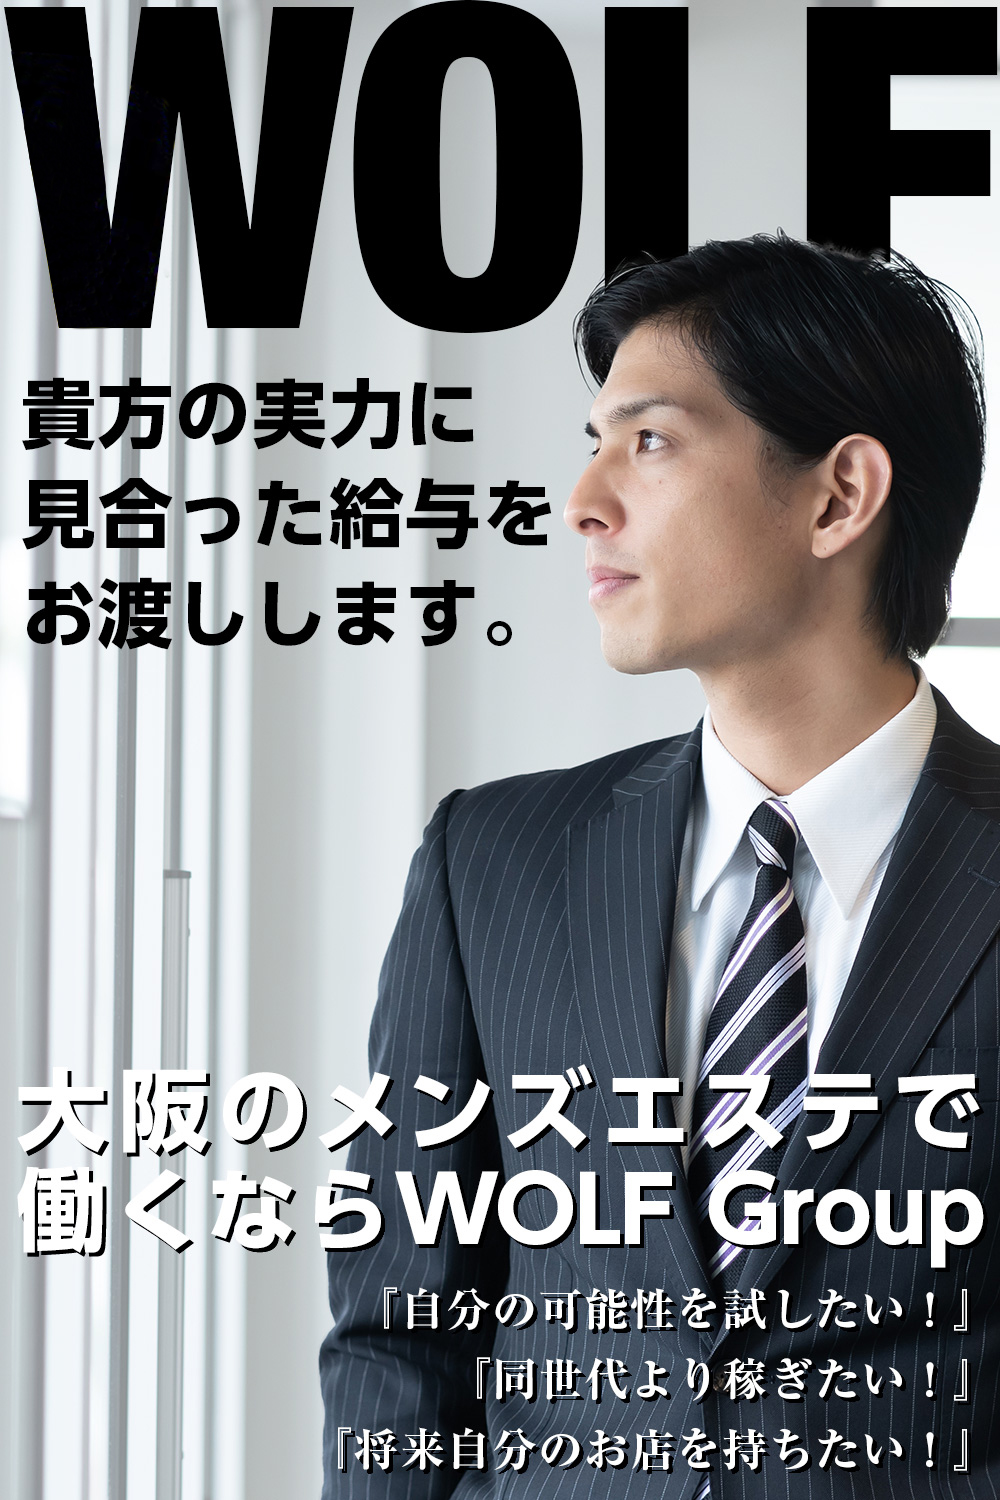 Wolf Group